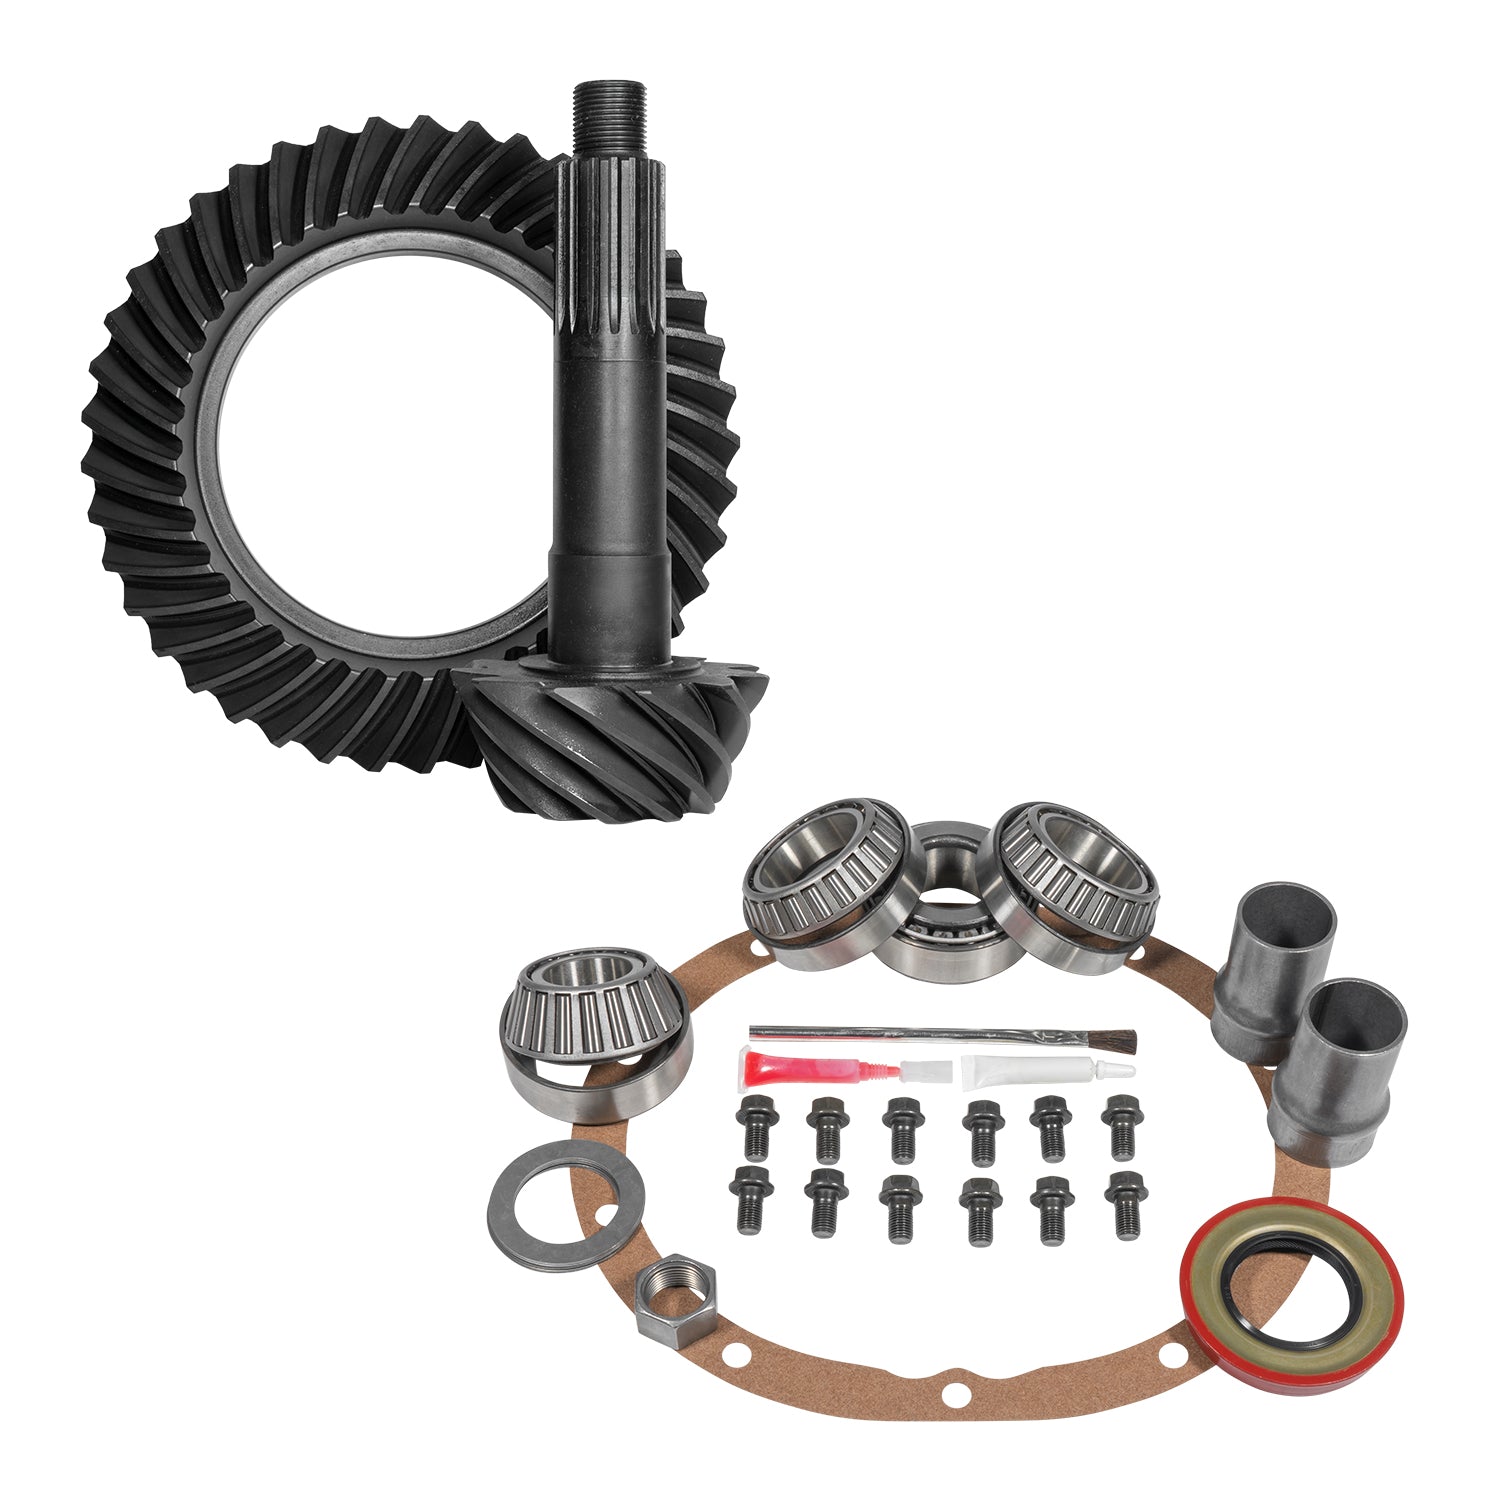 Yukon Gear Chevrolet Differential Ring and Pinion Kit - Rear YGK2367